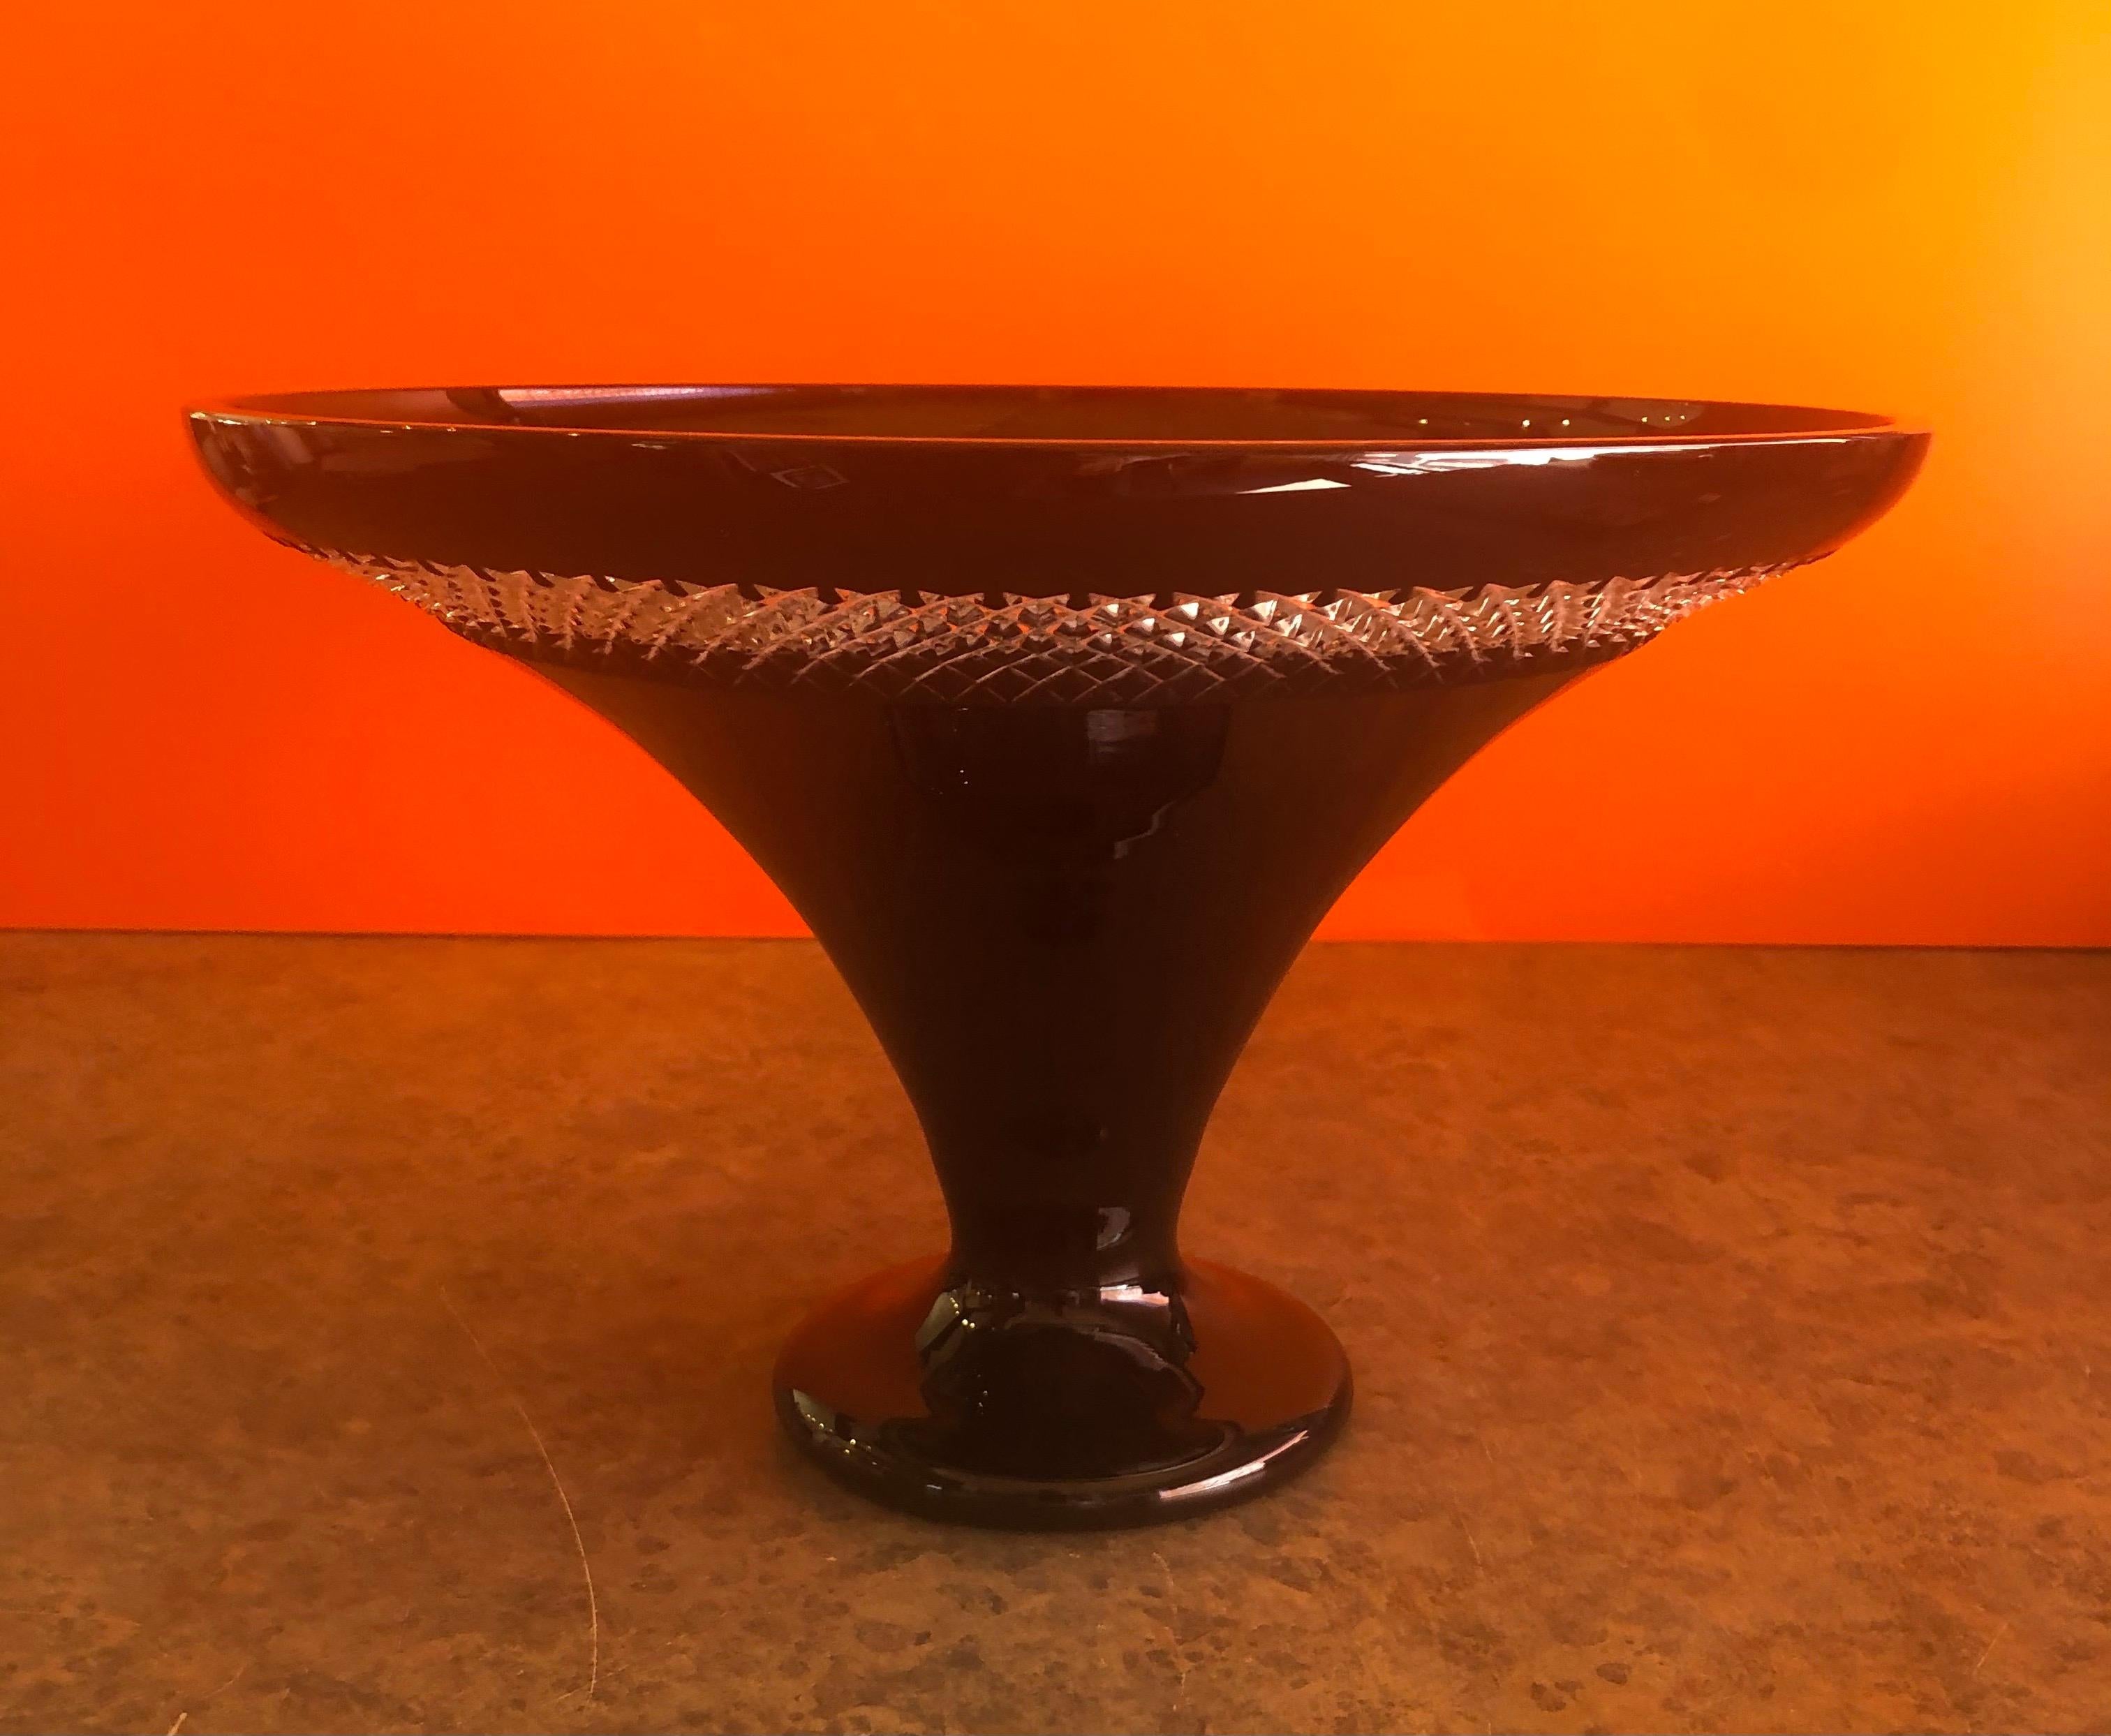 Gorgeous black cut footed crystal centerpiece bowl by John Rocha for Waterford, circa 2000s. Dramatic and stylish, the 